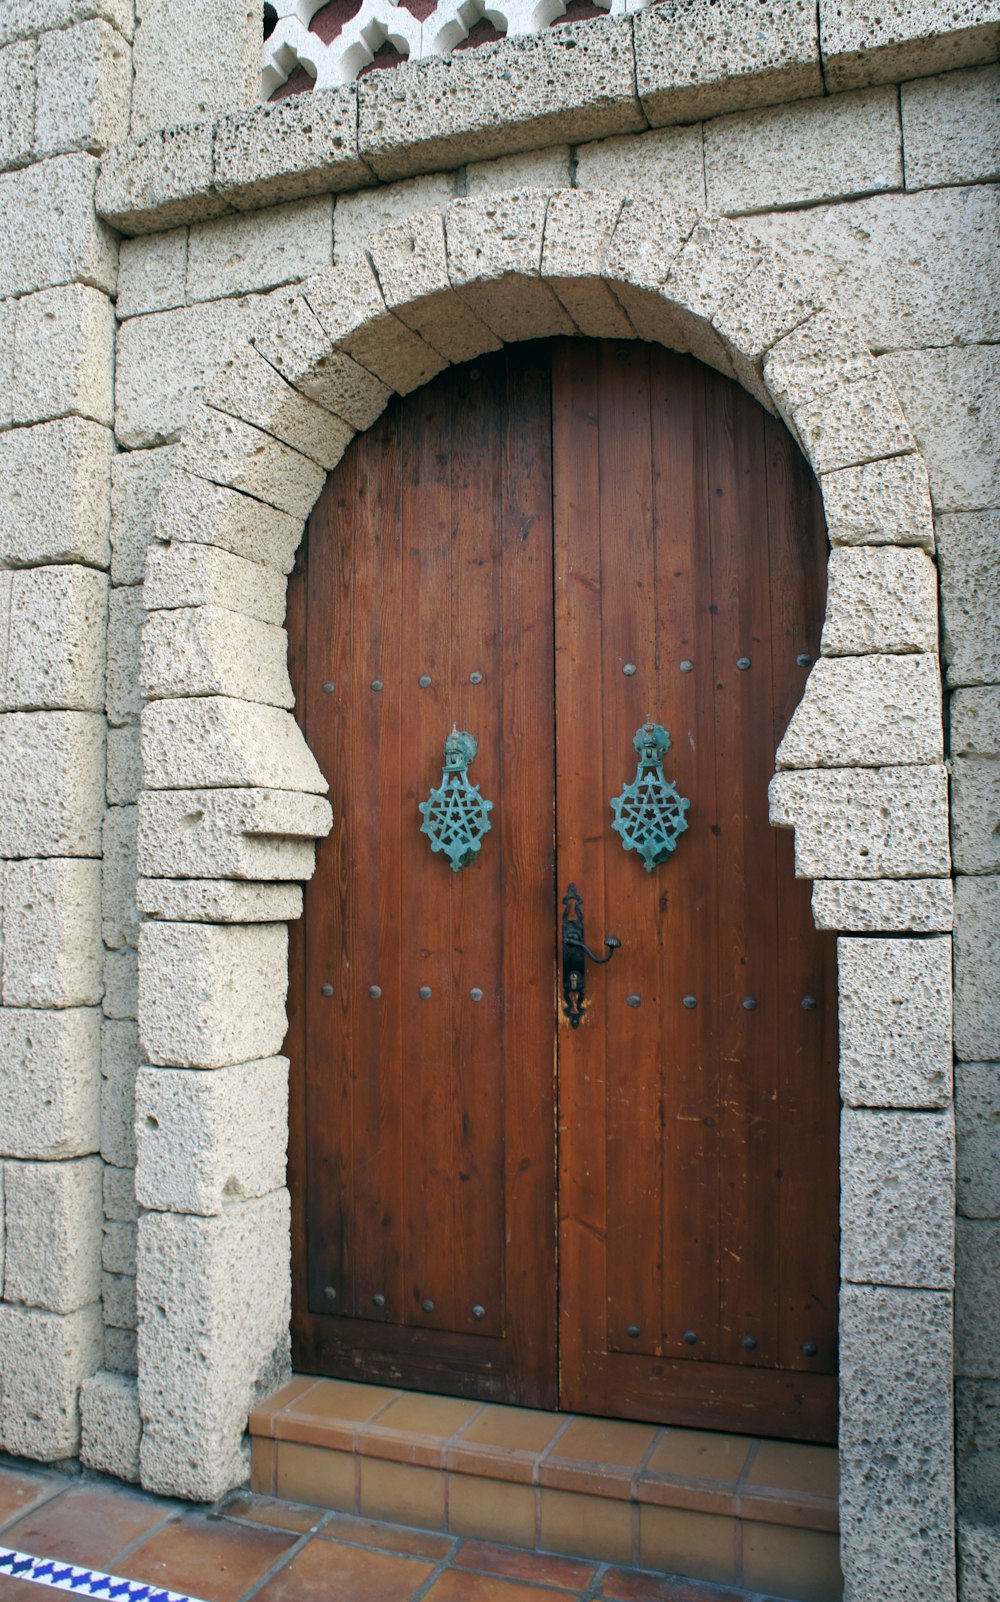 a large wooden door with a decorative arch